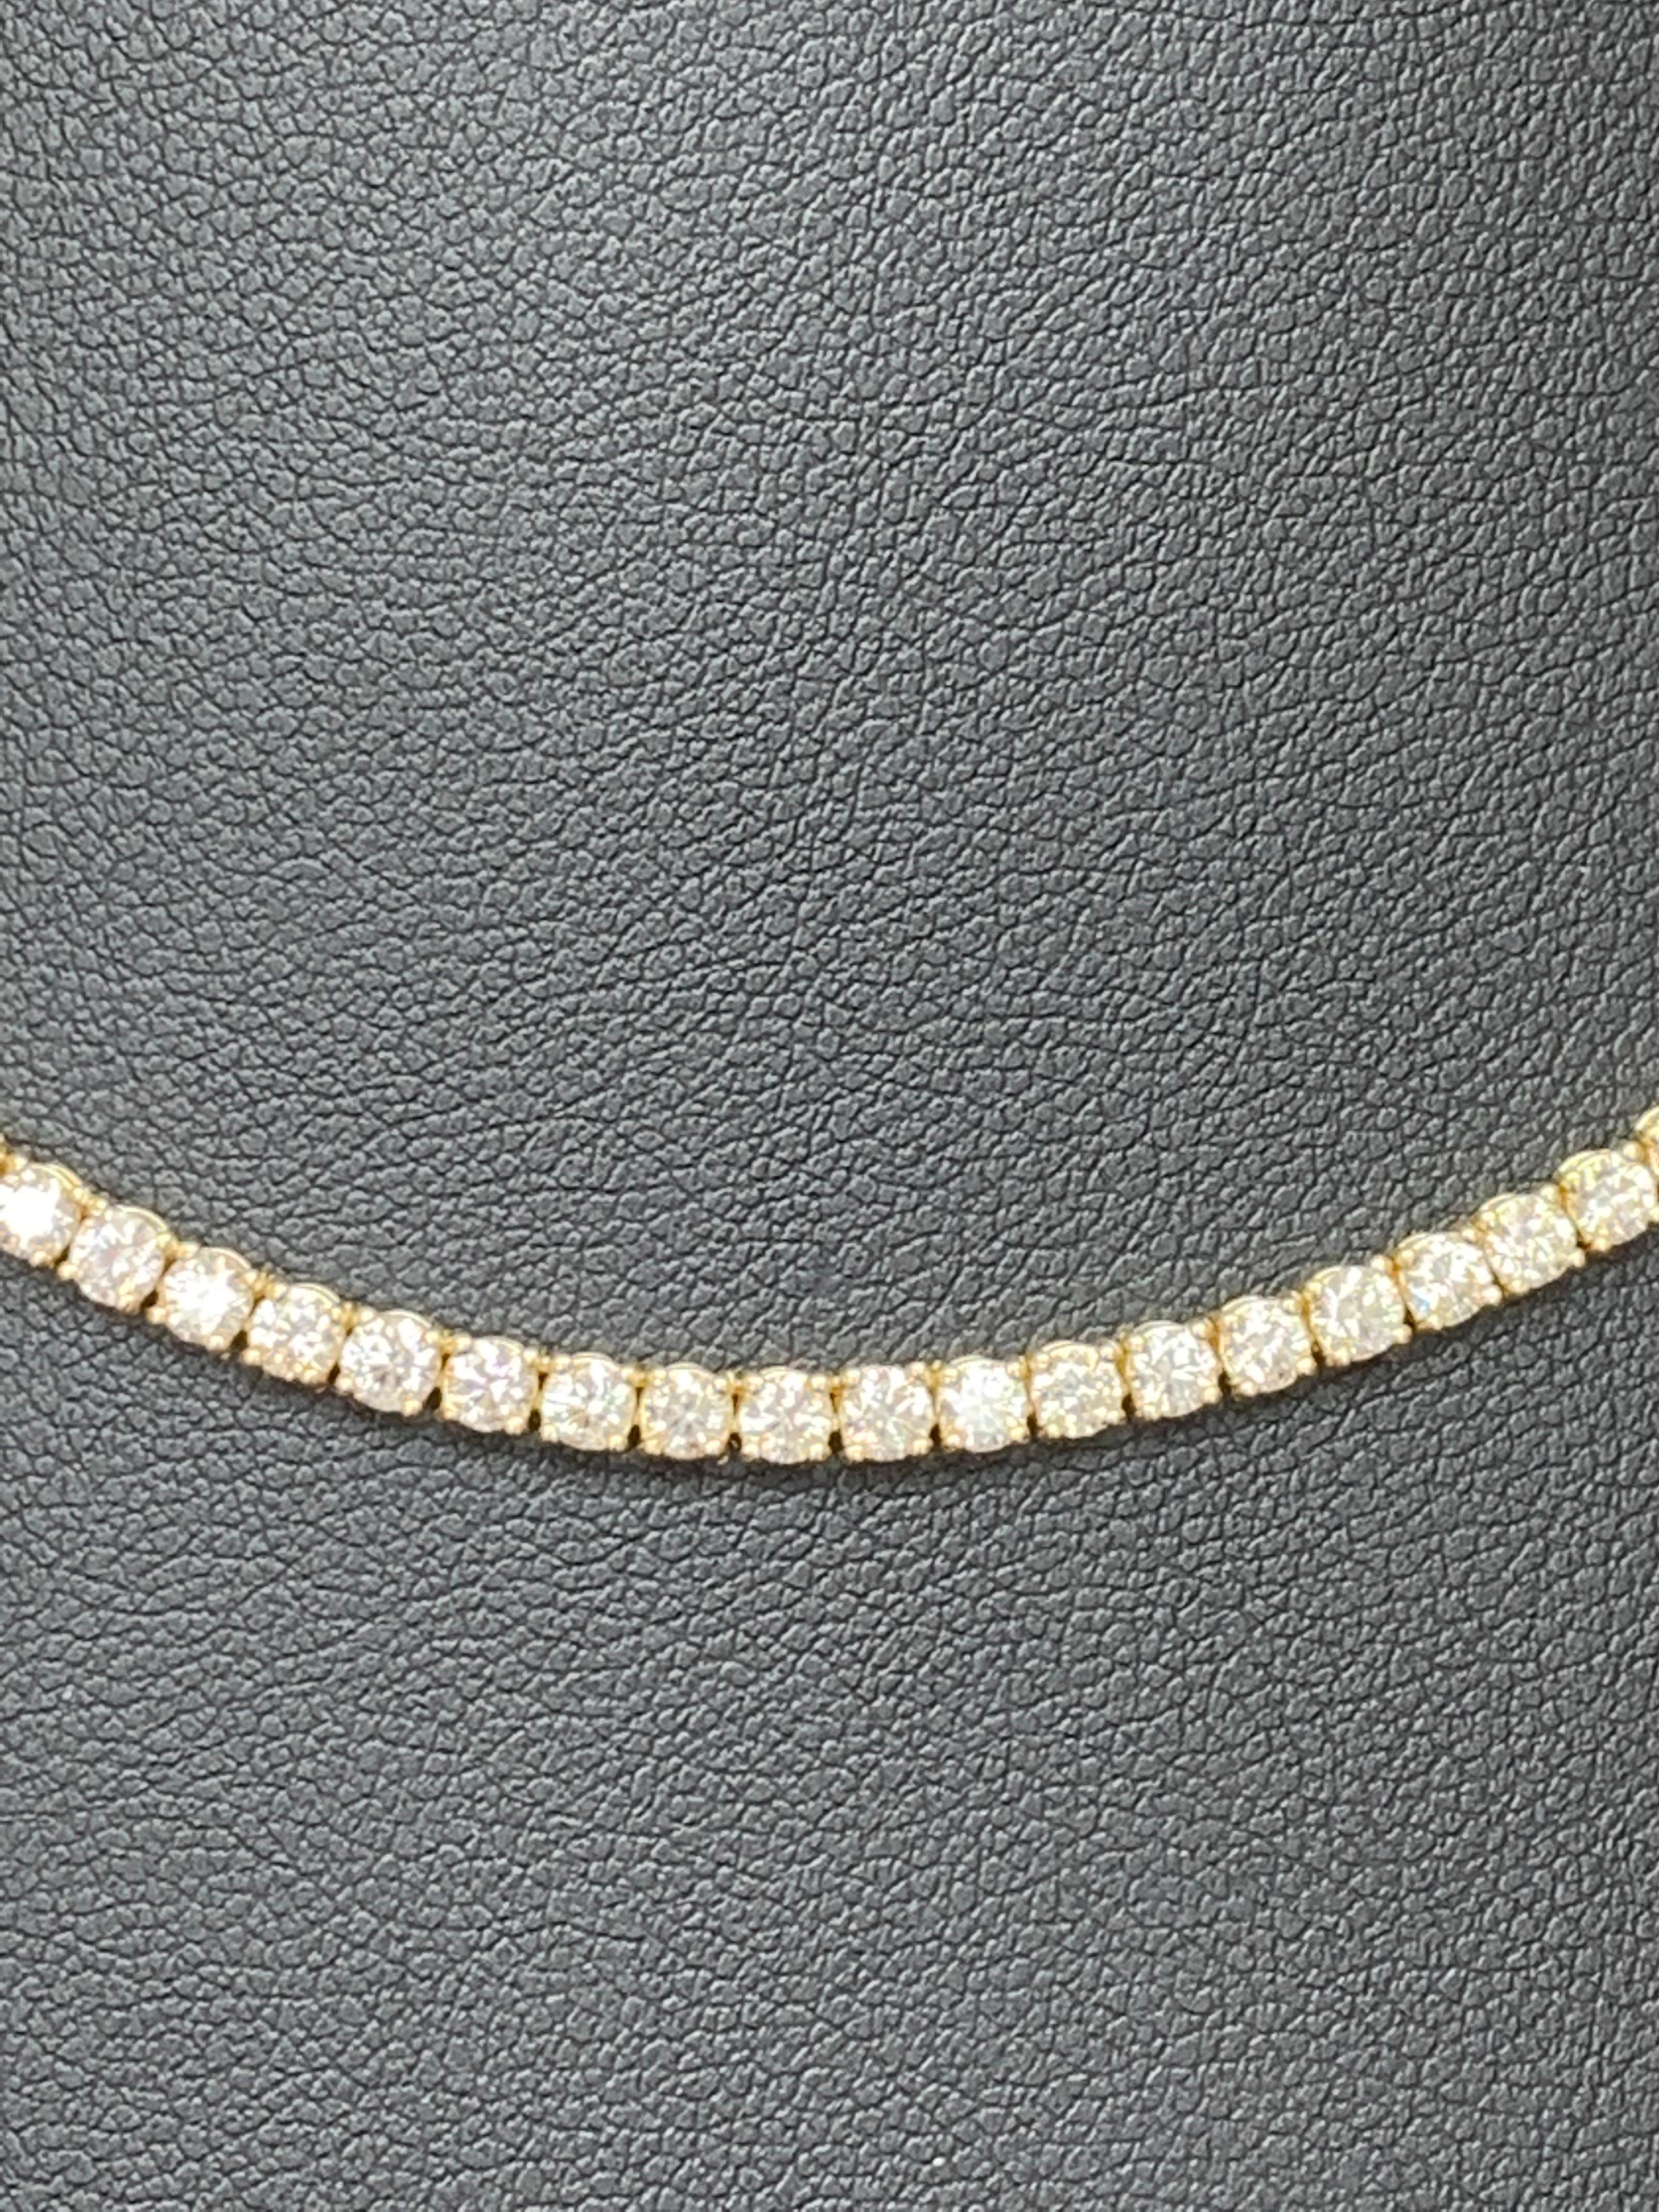 8.37 Carat Diamond Tennis Necklace in 14K Yellow Gold For Sale 1